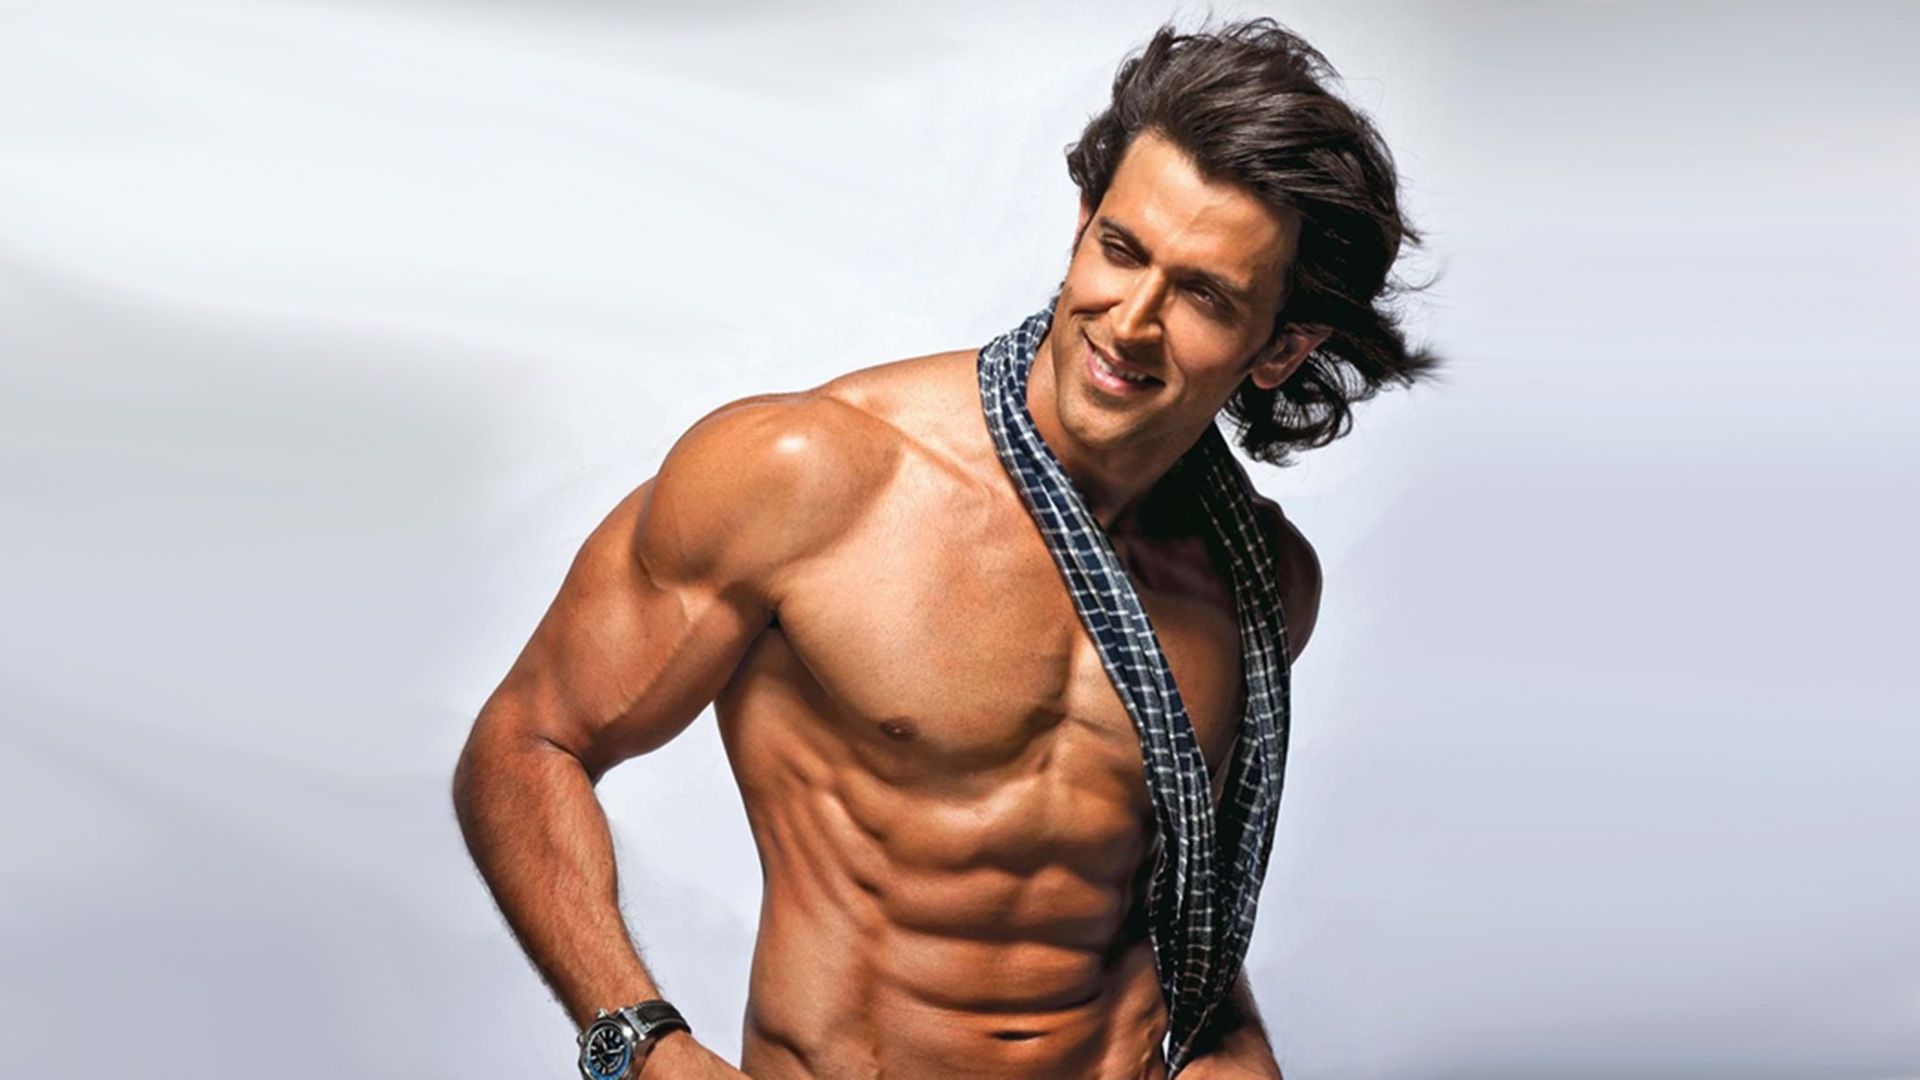 What is the DOB of Hrithik Roshan?